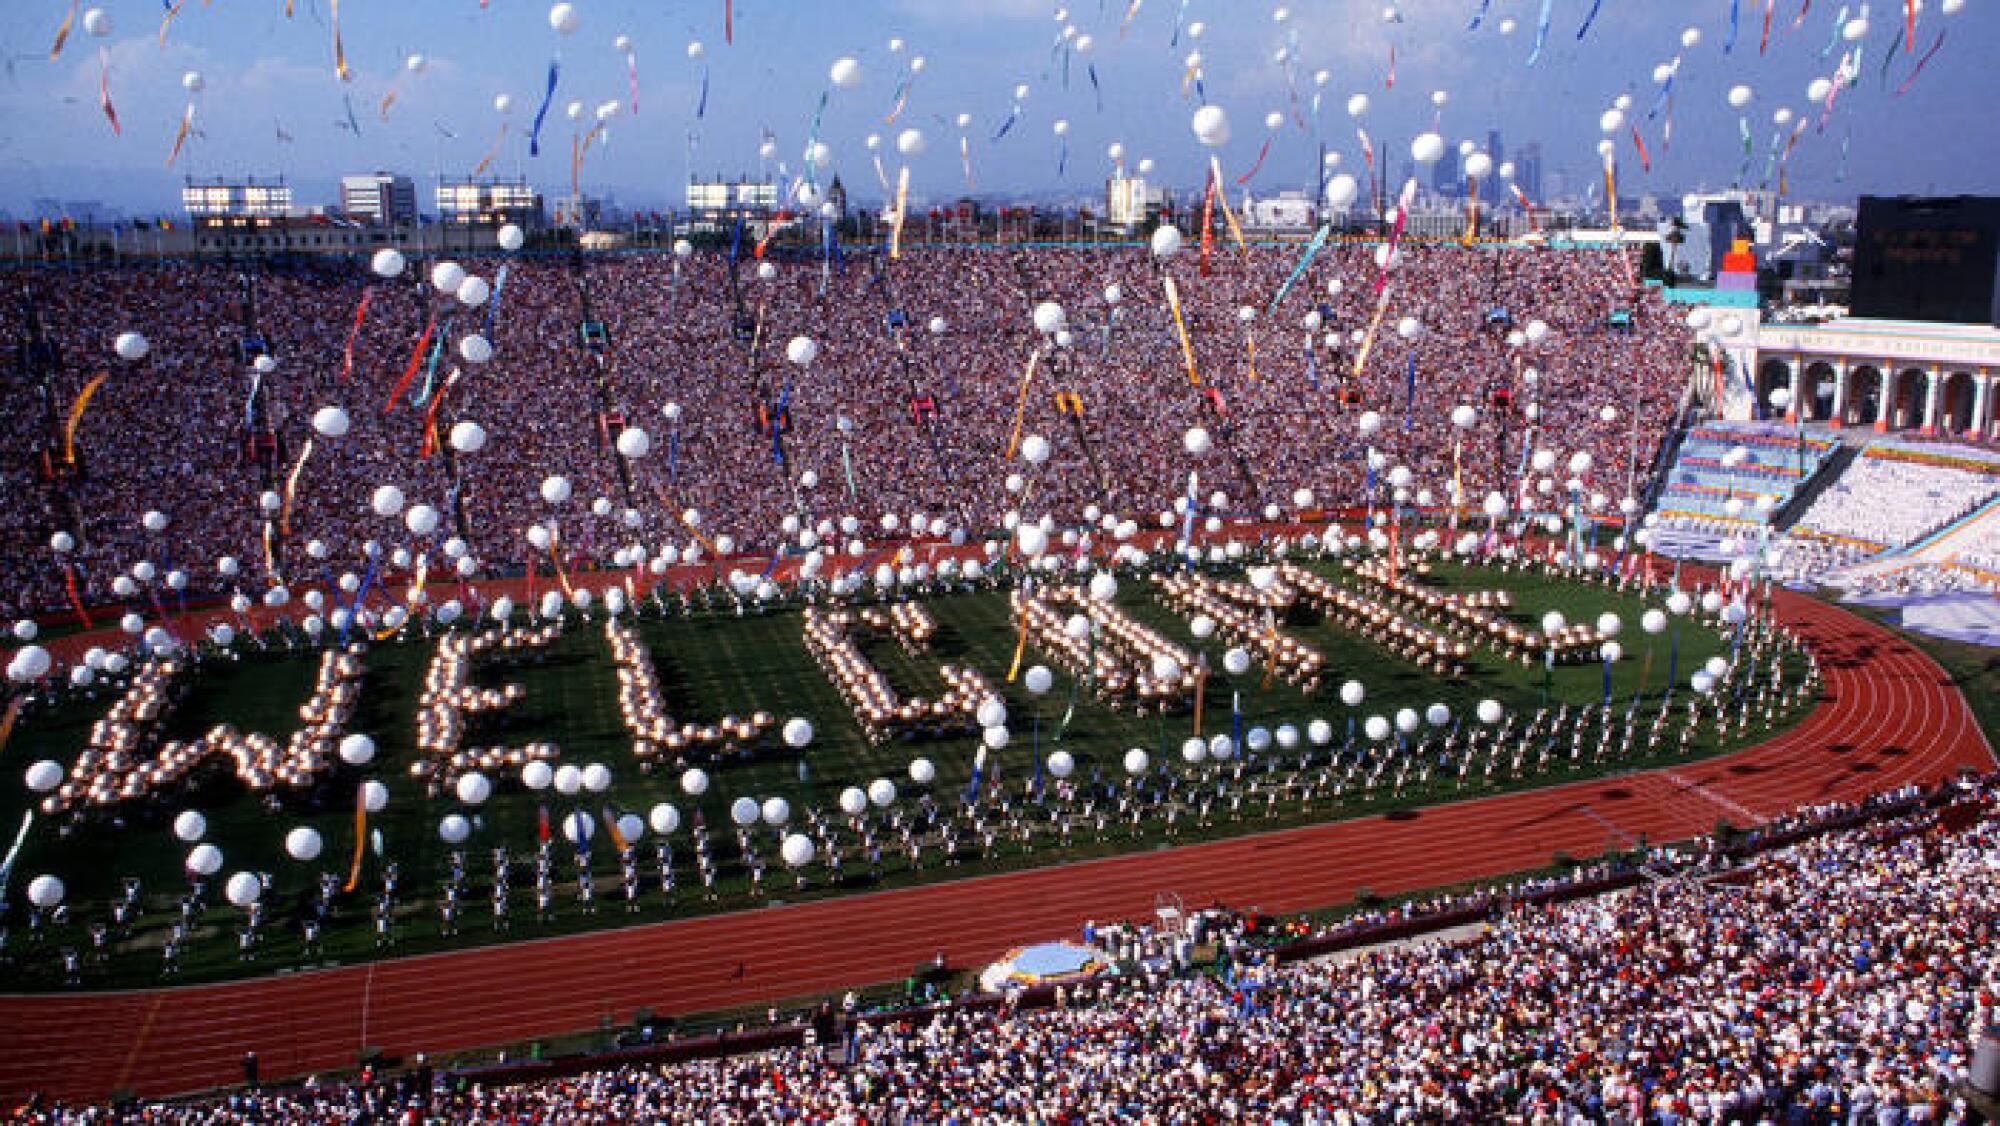 "Welcome" is spelled out on the field of the L.A. Coliseum during the 1984 Olympics opening ceremony. 